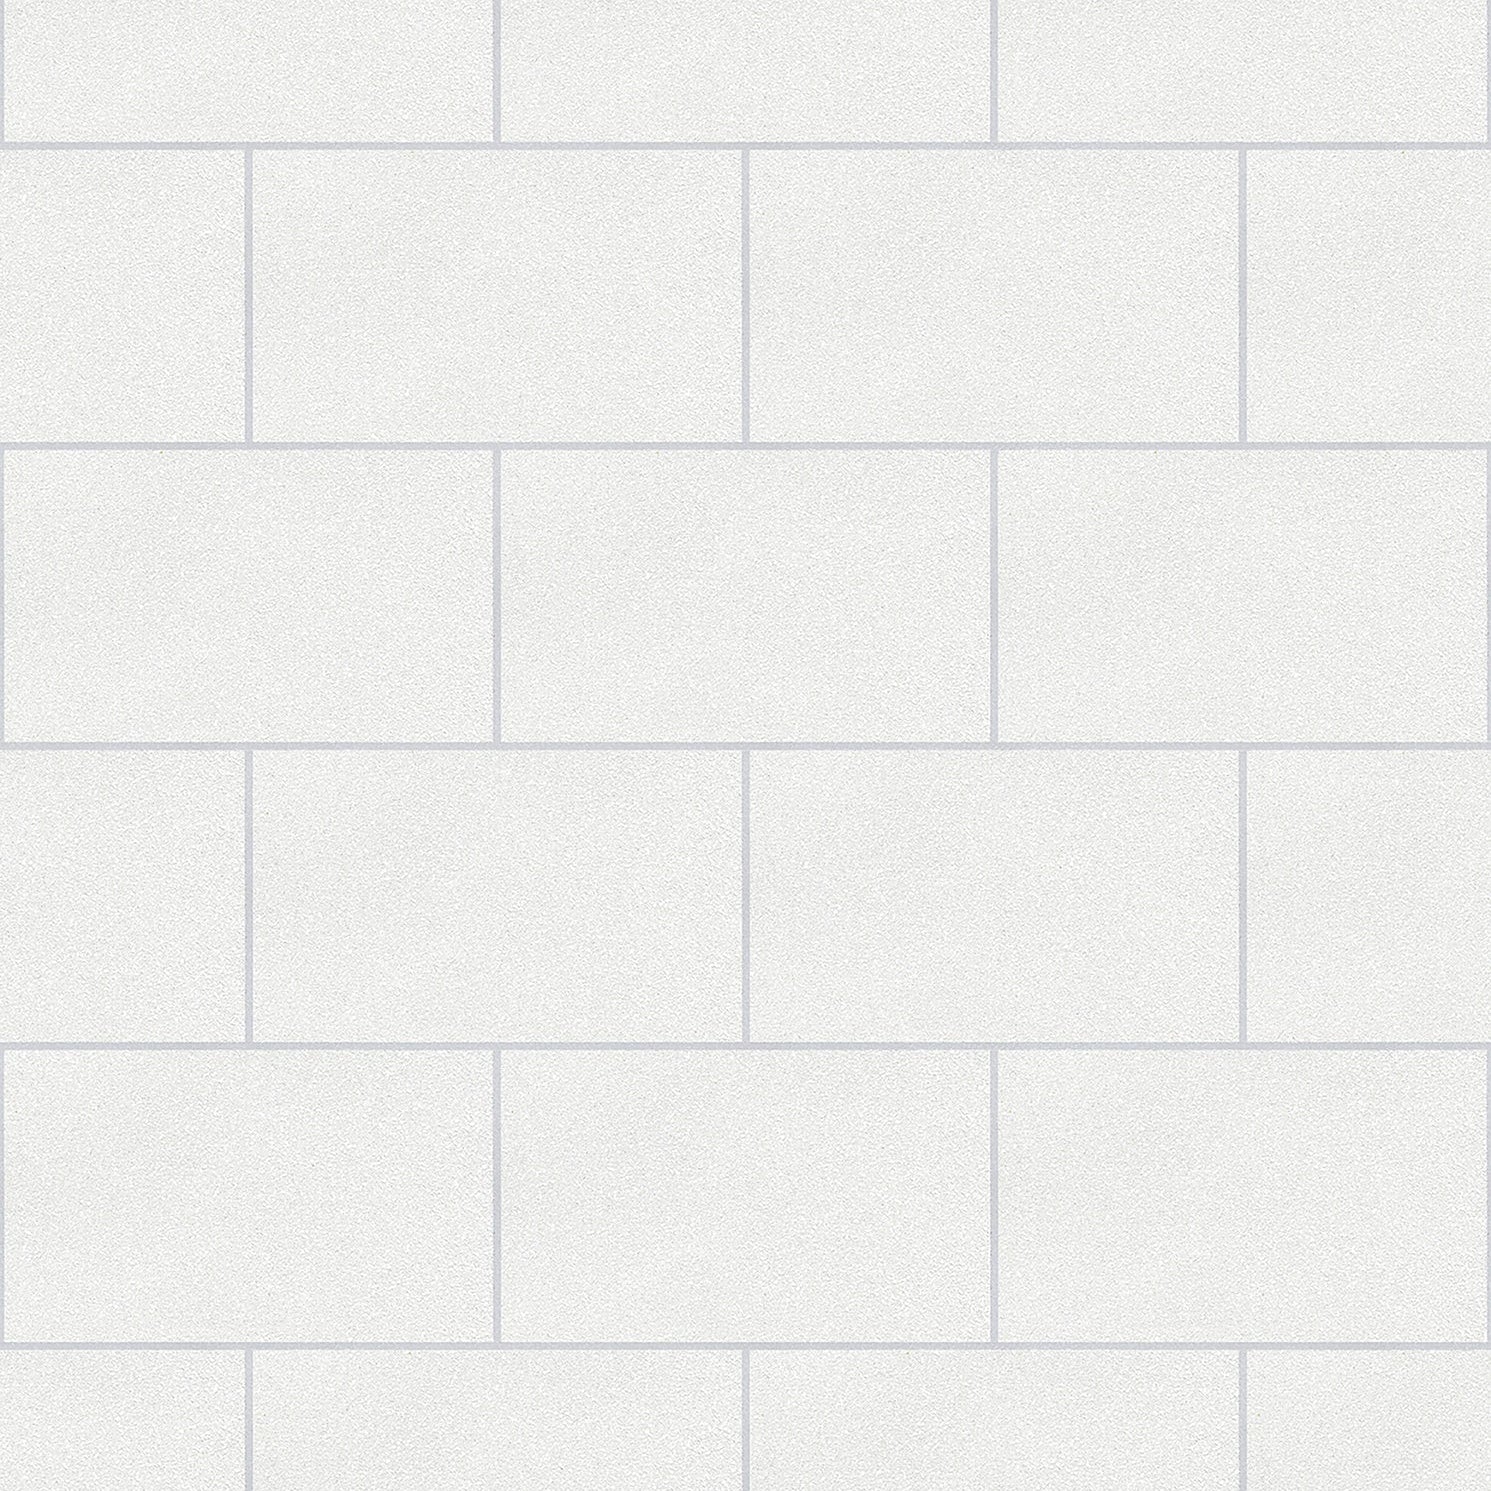 View 2836-M1054 Shades of Grey Whites & Off-Whites Tiles Wallpaper by Advantage